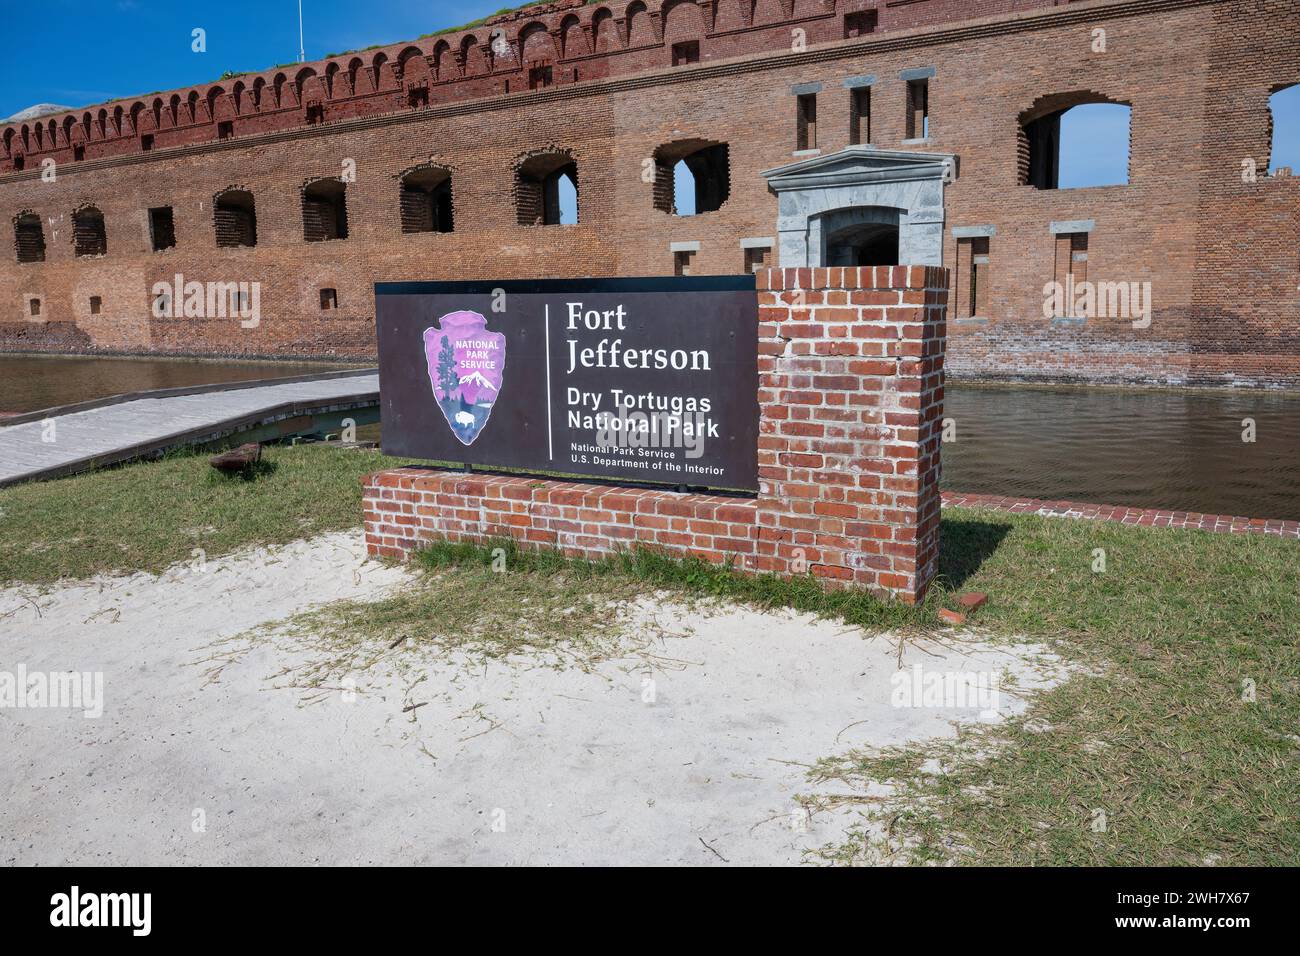 Exterior walls and  sign of Fort Jefferson, Dry Tortugas National Park, Florida, USA. Stock Photo